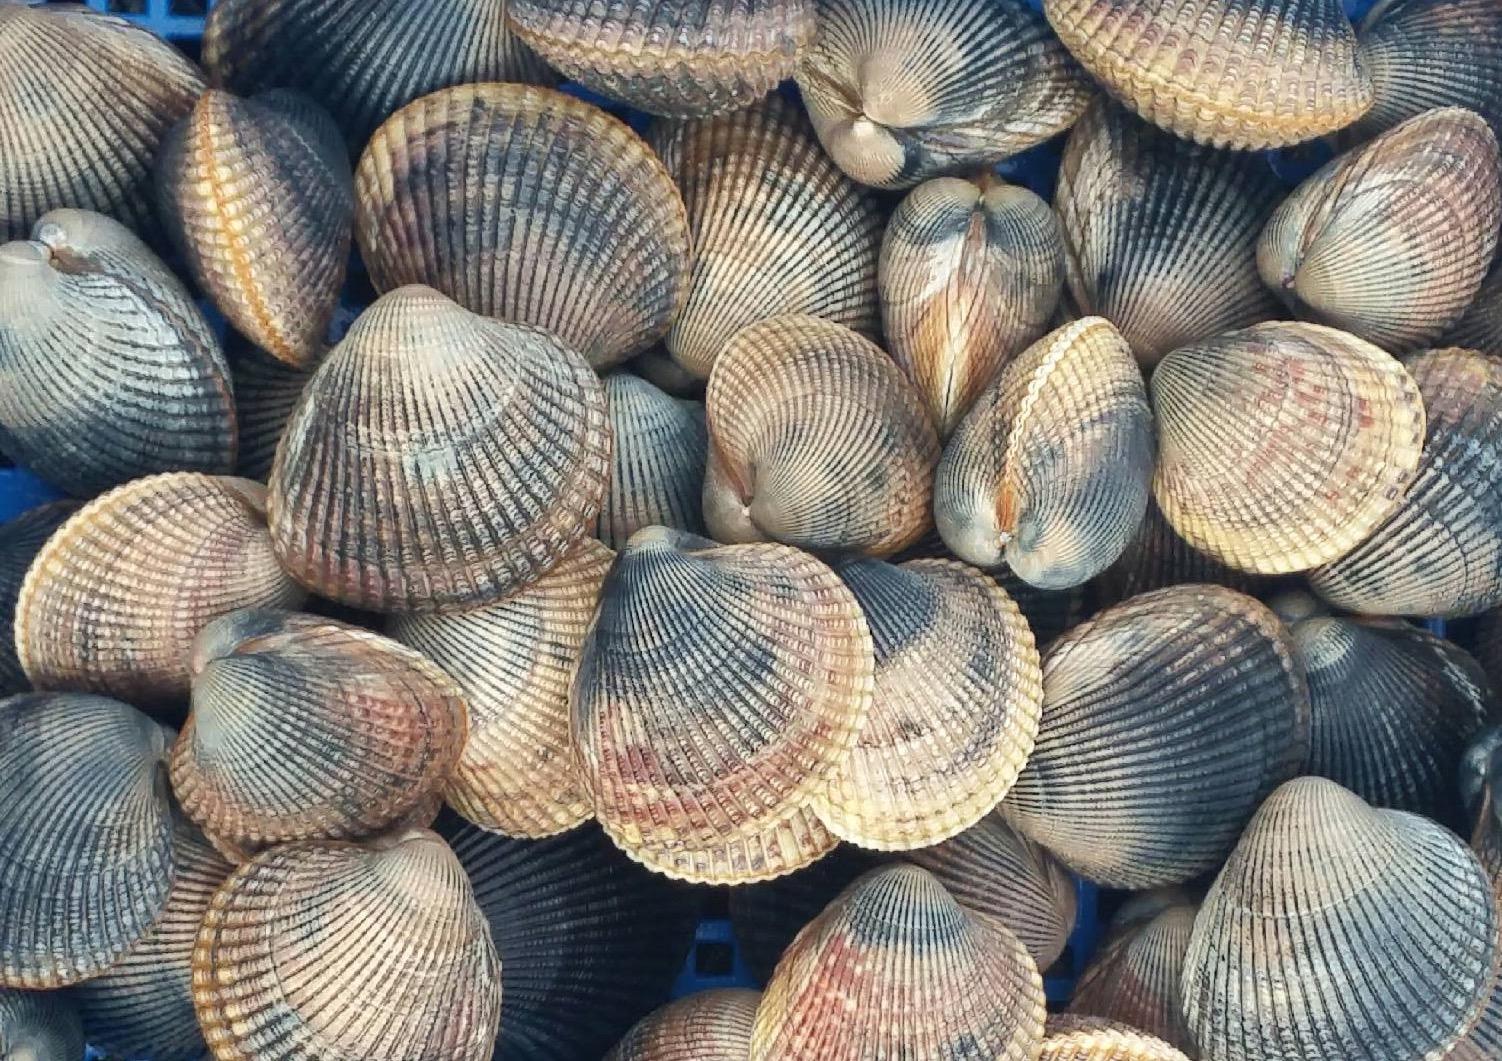 For sustenance and tradition, Puget Sound tribes and scientists join forces to breed millions of clams Crosscut